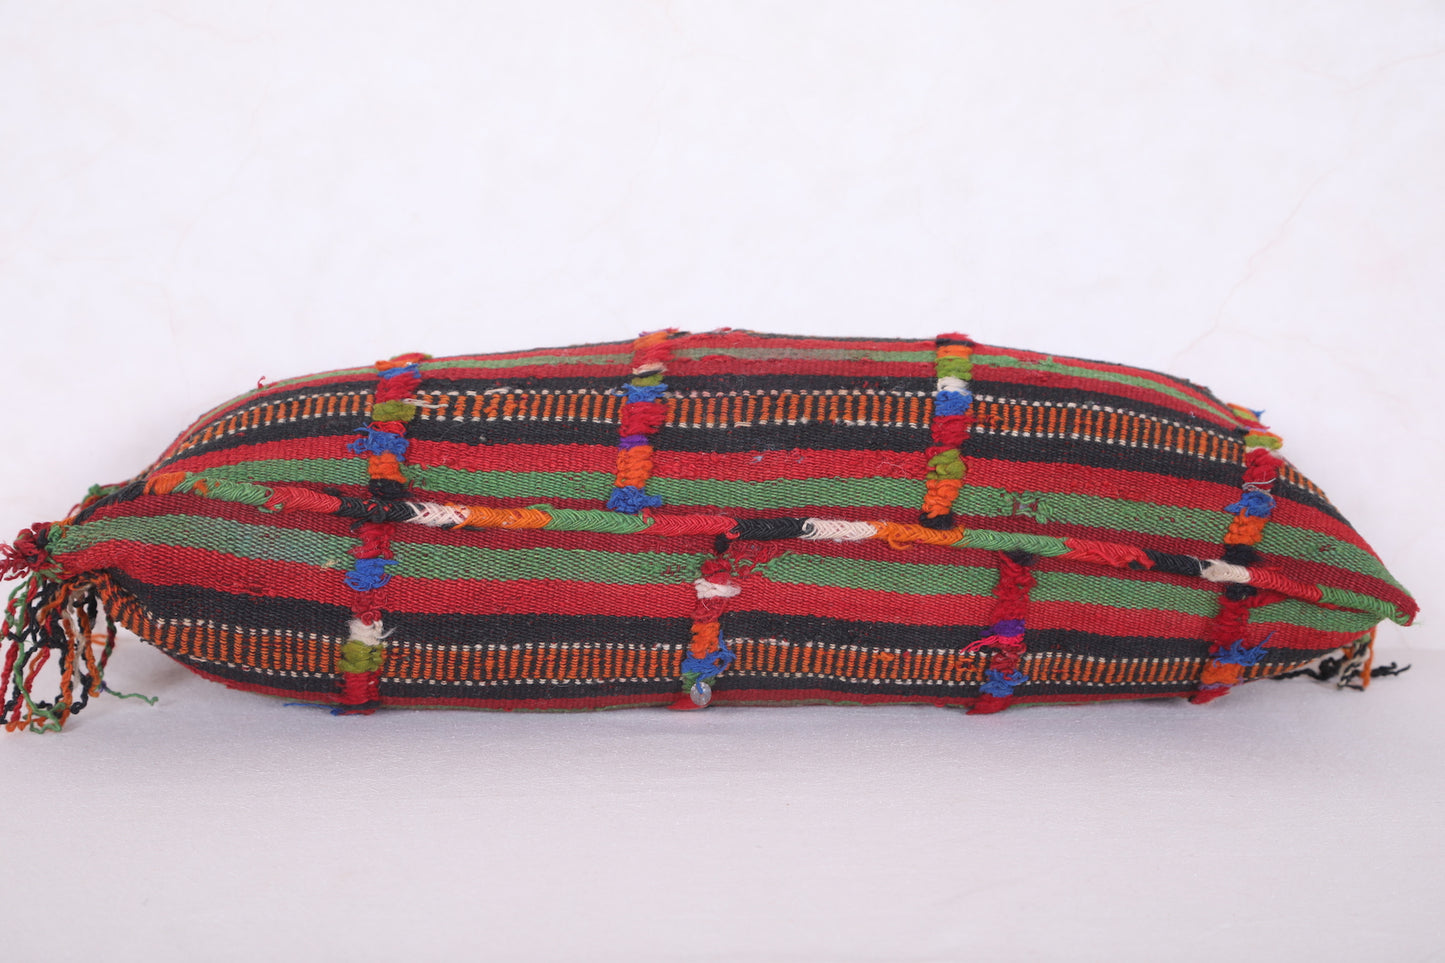 Long tribal pillow 13.7 INCHES X 27.5 INCHES